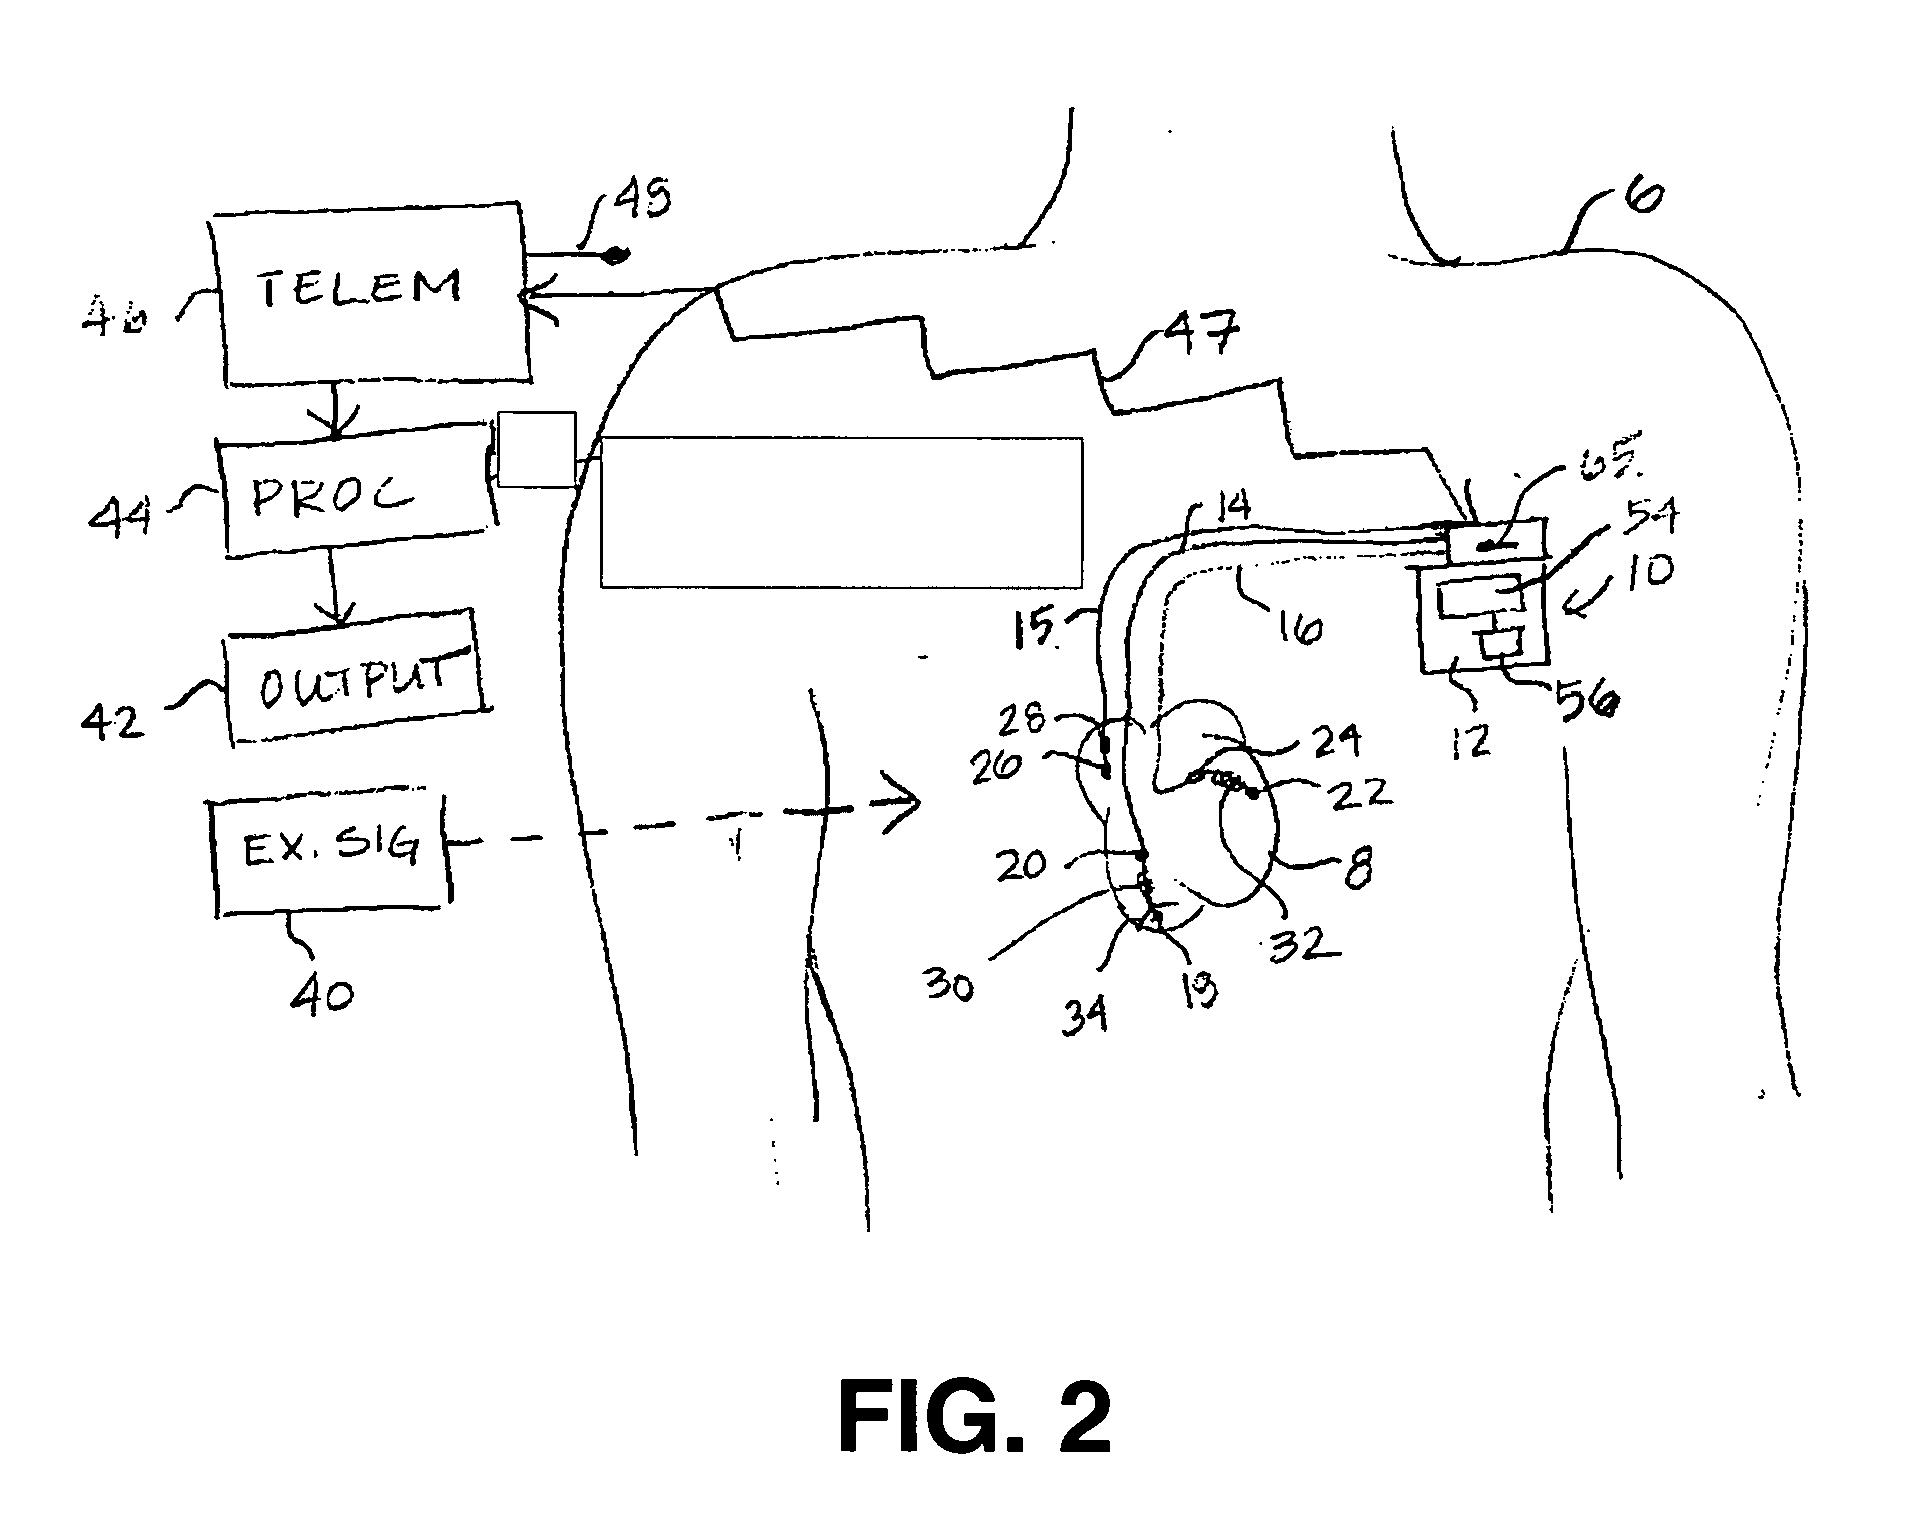 Pacemaker lead with motion sensor